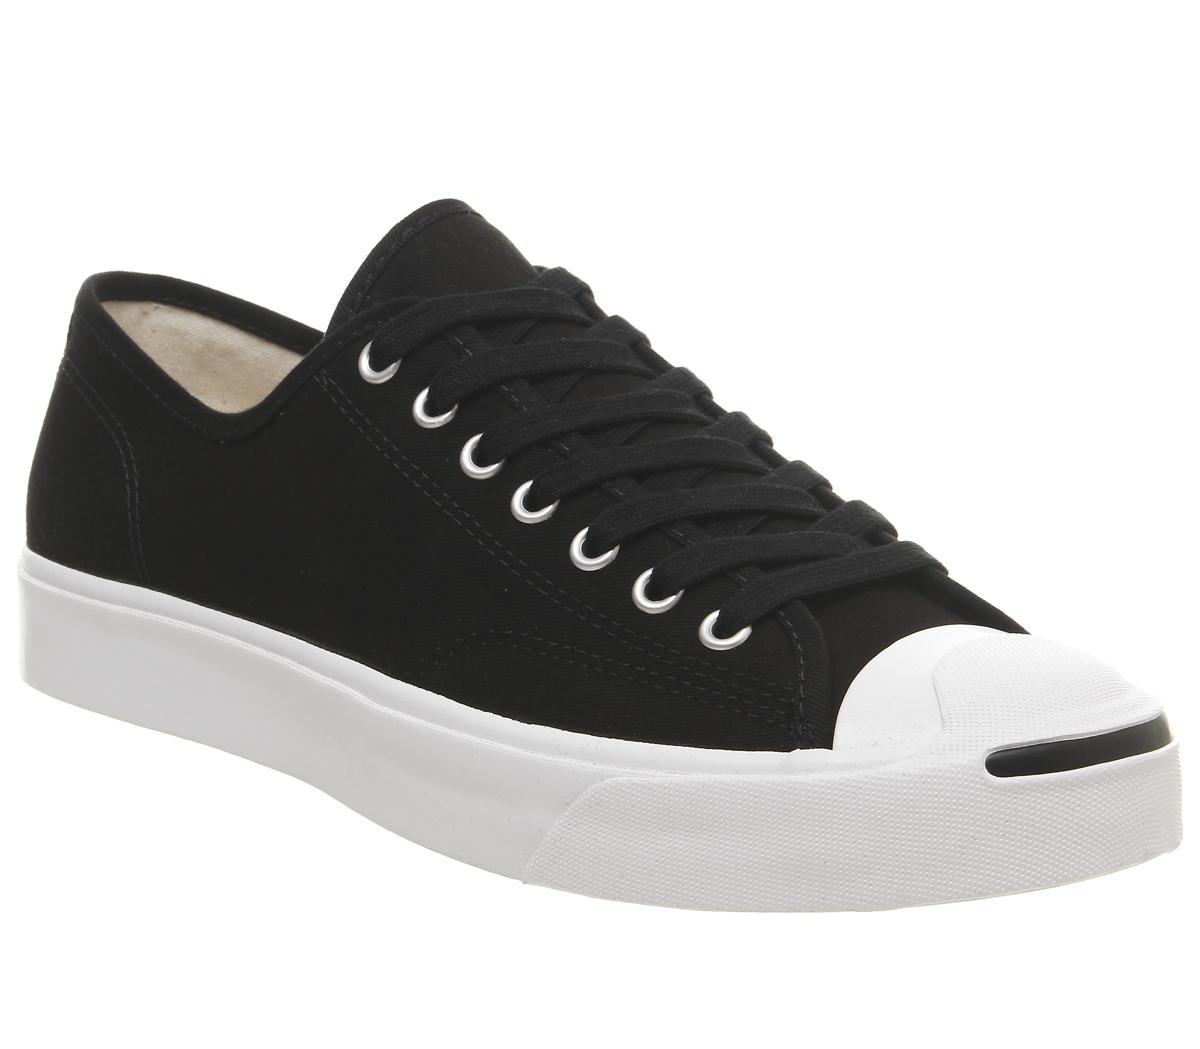 ConverseJack Purcell TrainersBlack White